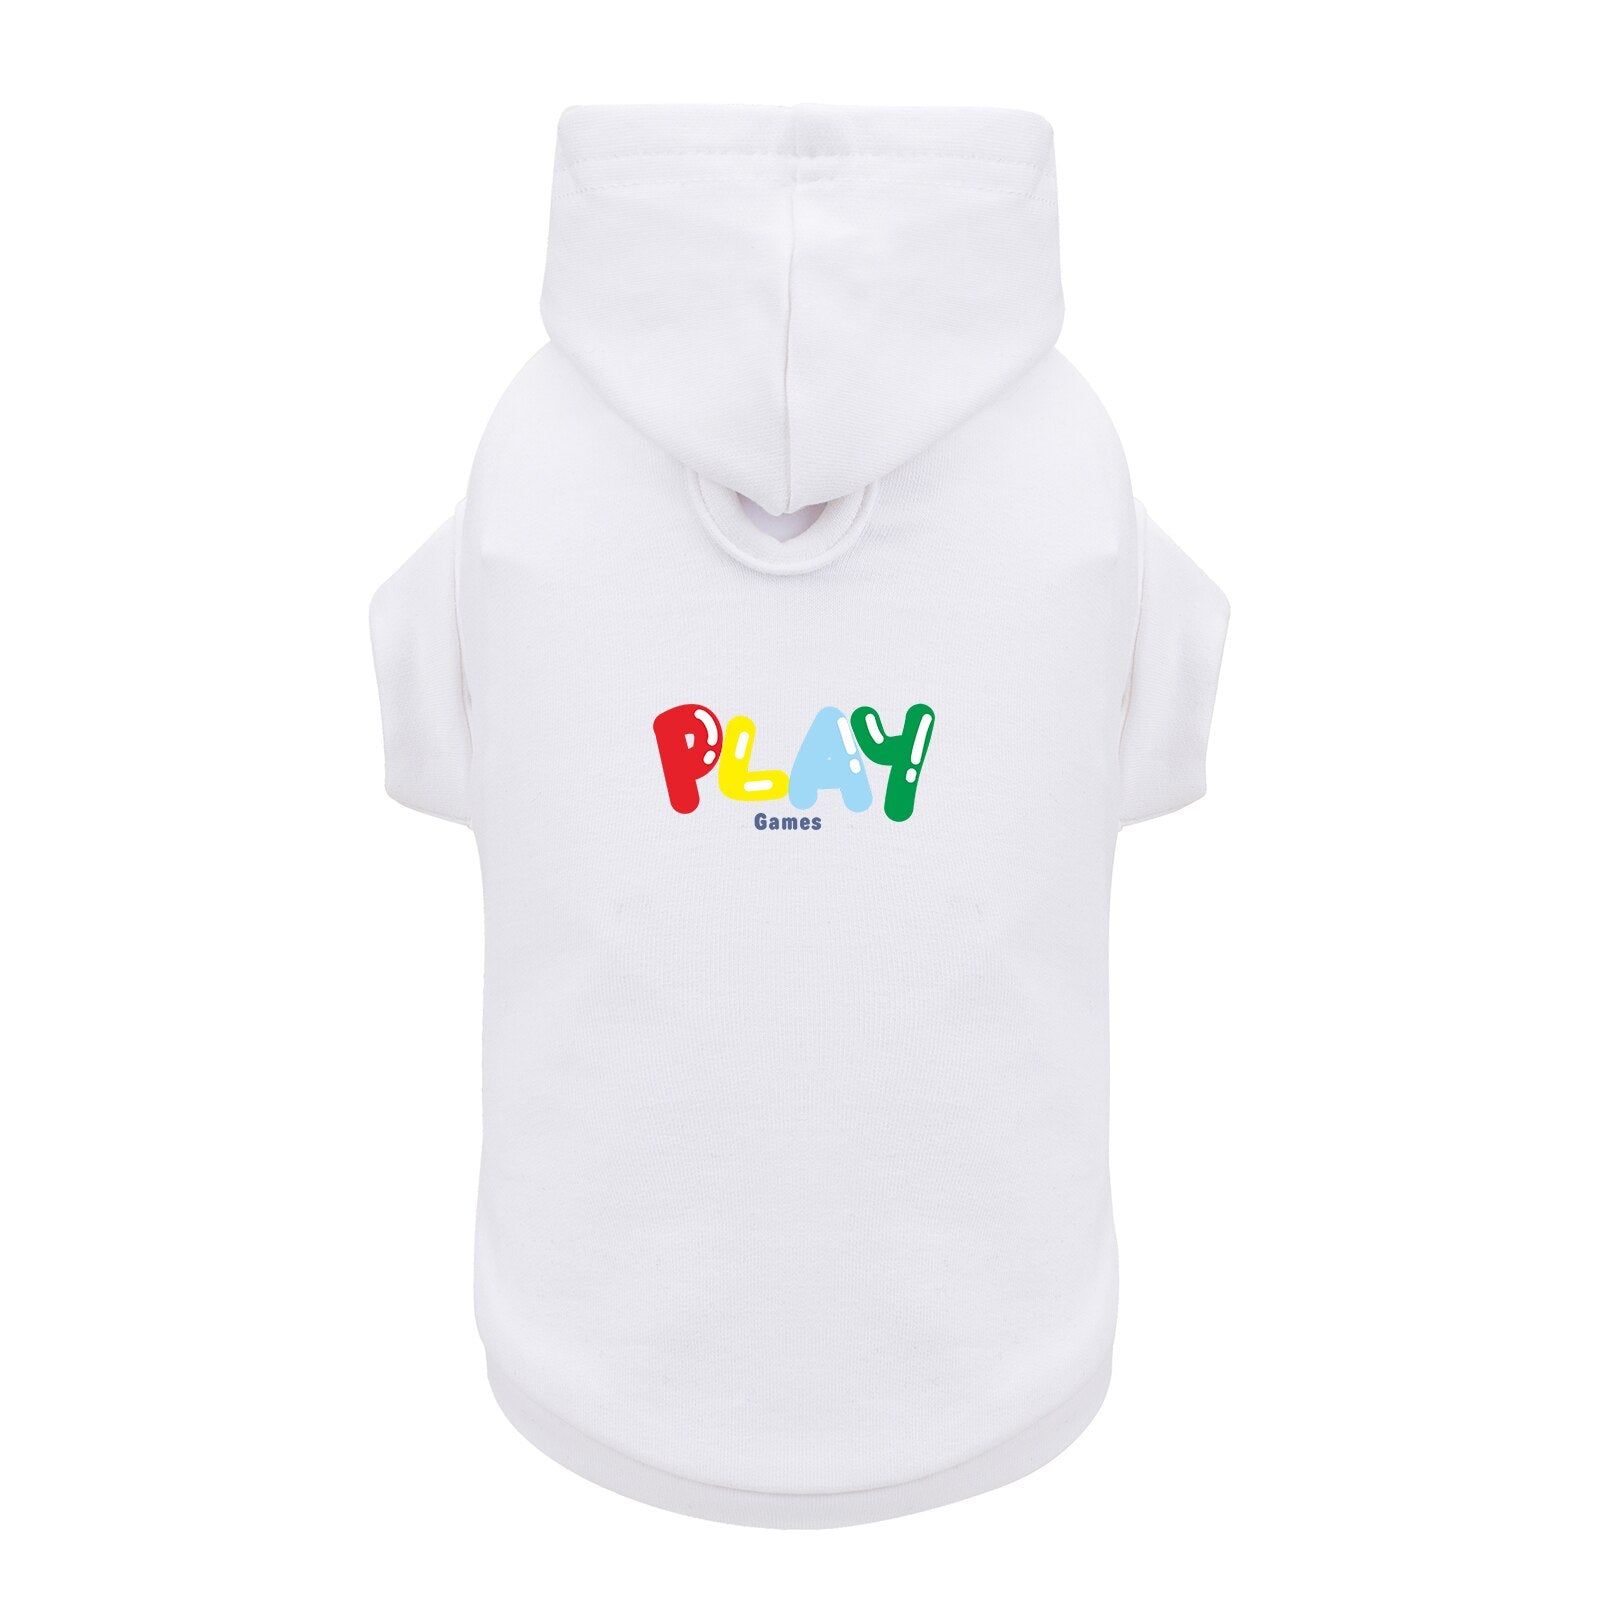 Letter and Pattern Printed Pet Hoodies for All Sizes and Ages Dogs and Cats, Cotton Soft Skin-Friendly Fabric